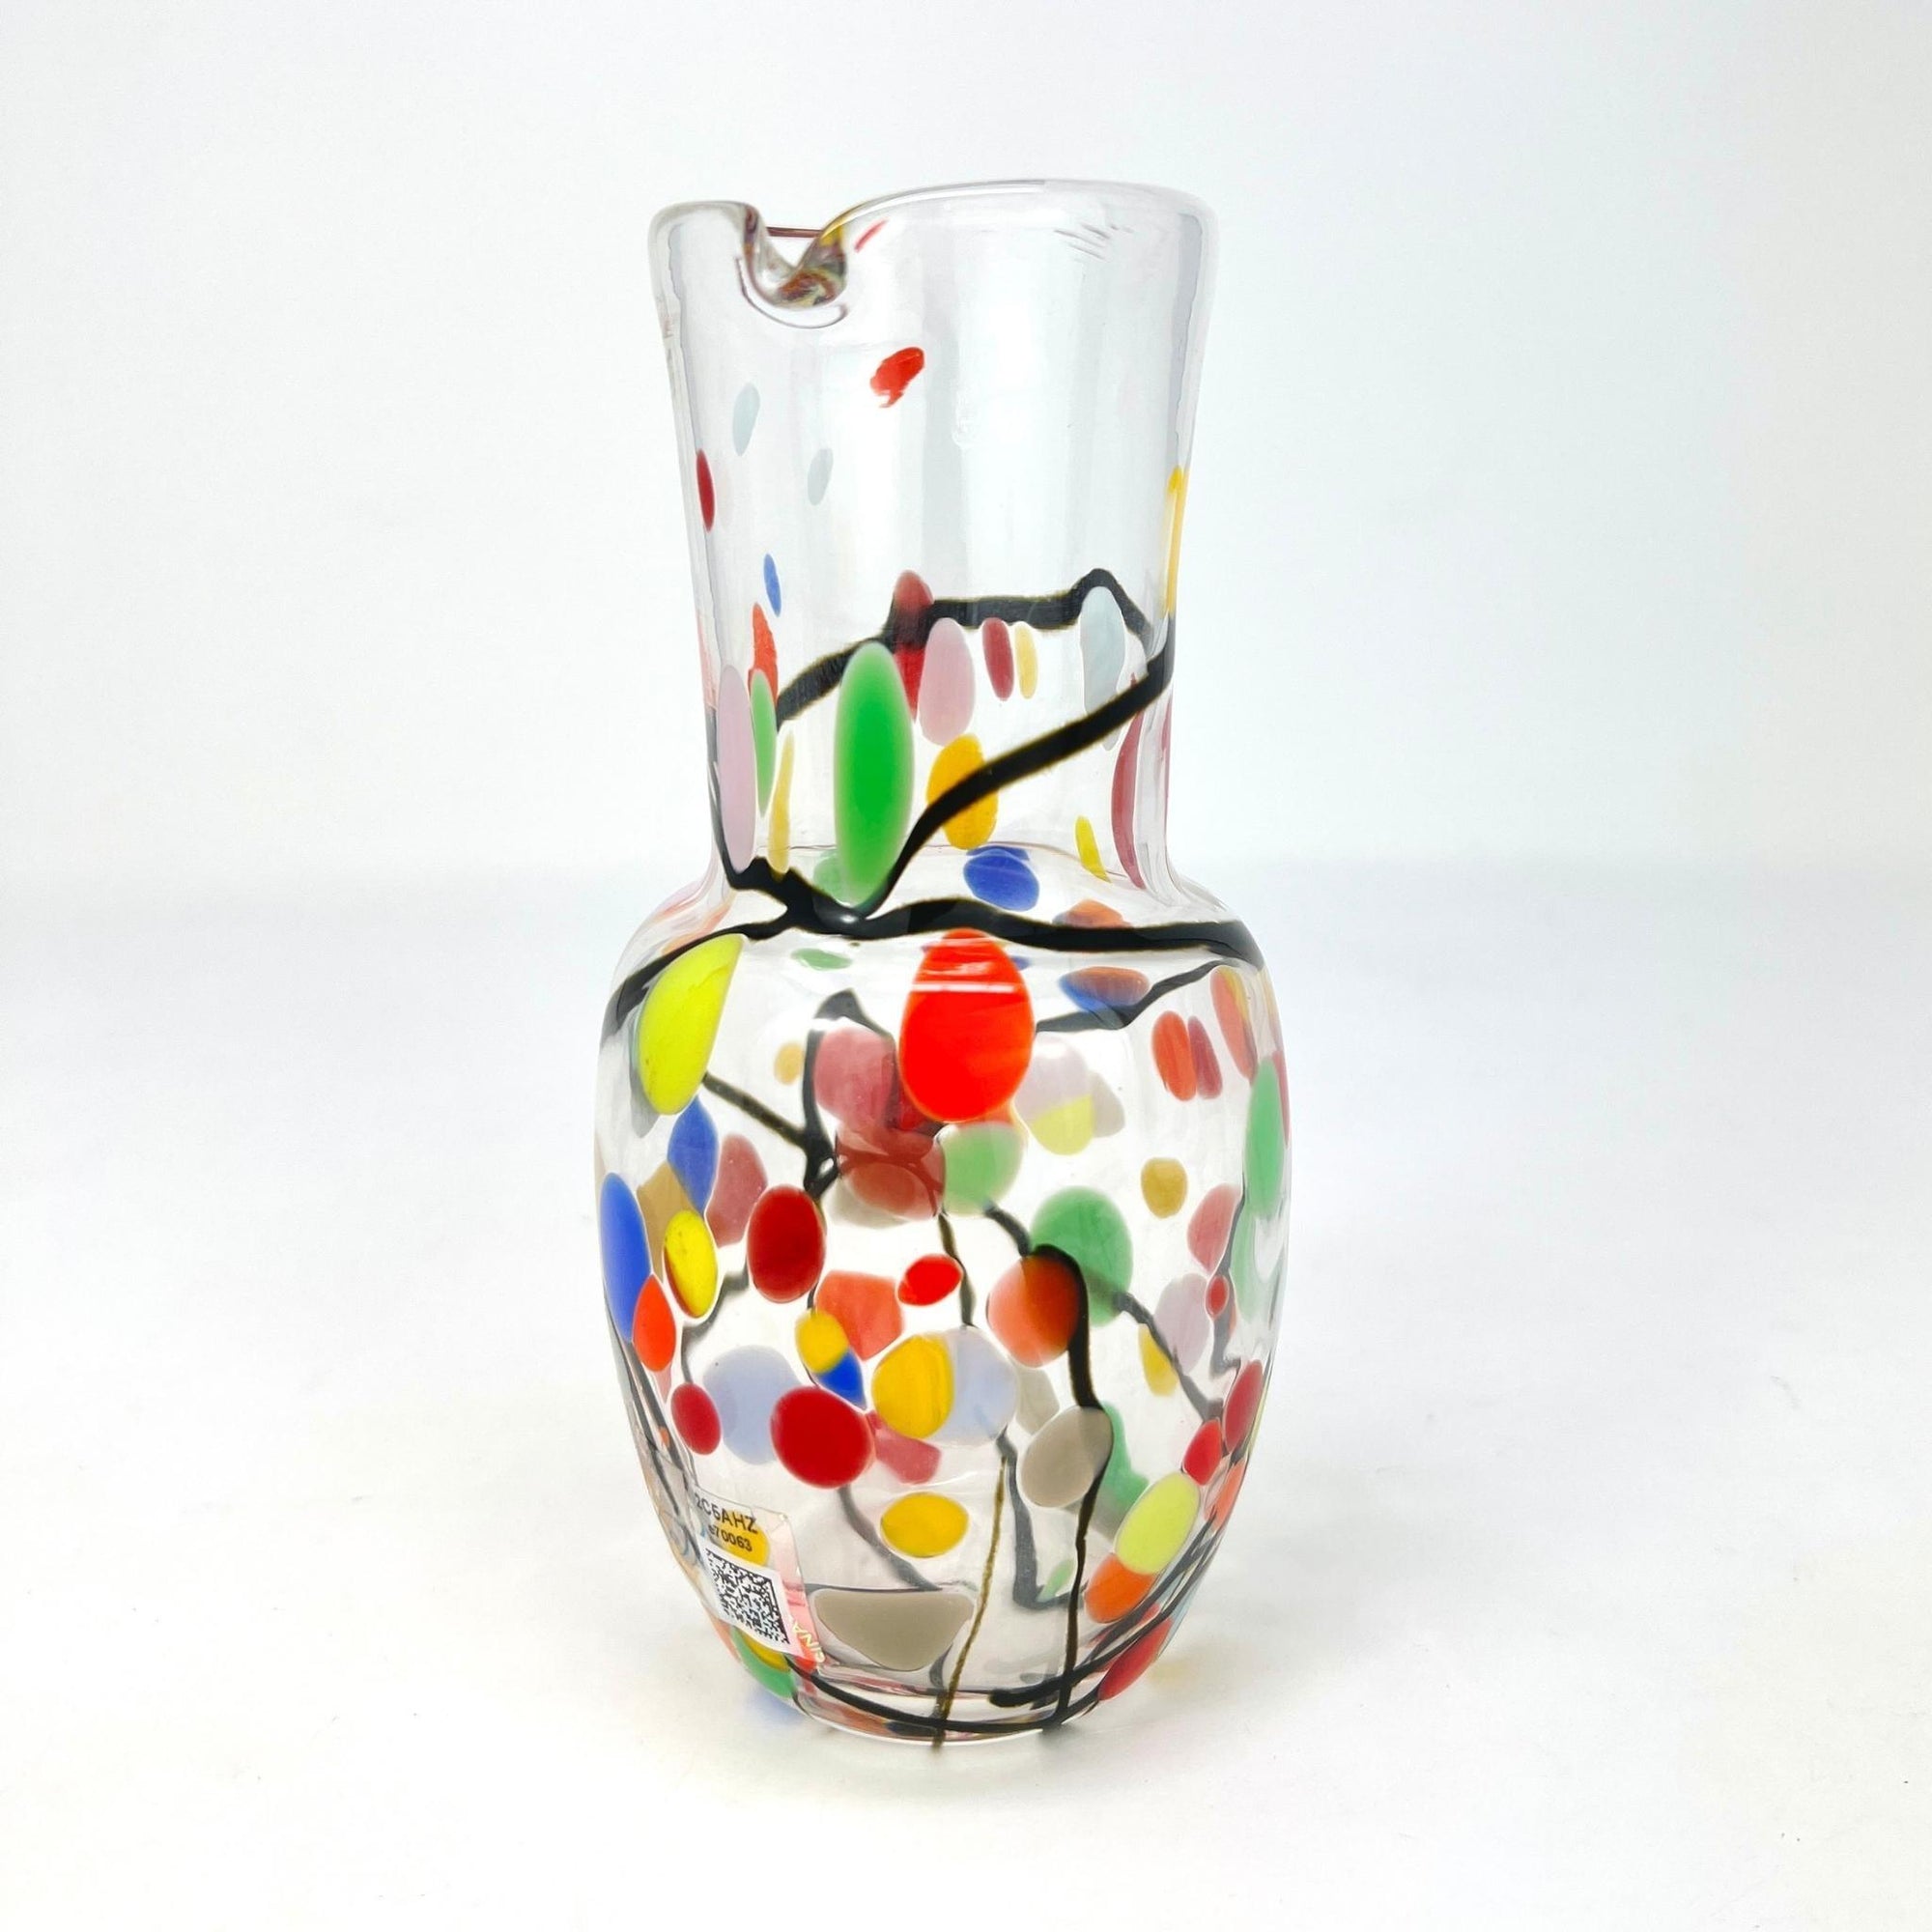 Picasso Individual Wine Carafe, Personal Decanter, Murano Glass, Made in Italy at MyItalianDecor